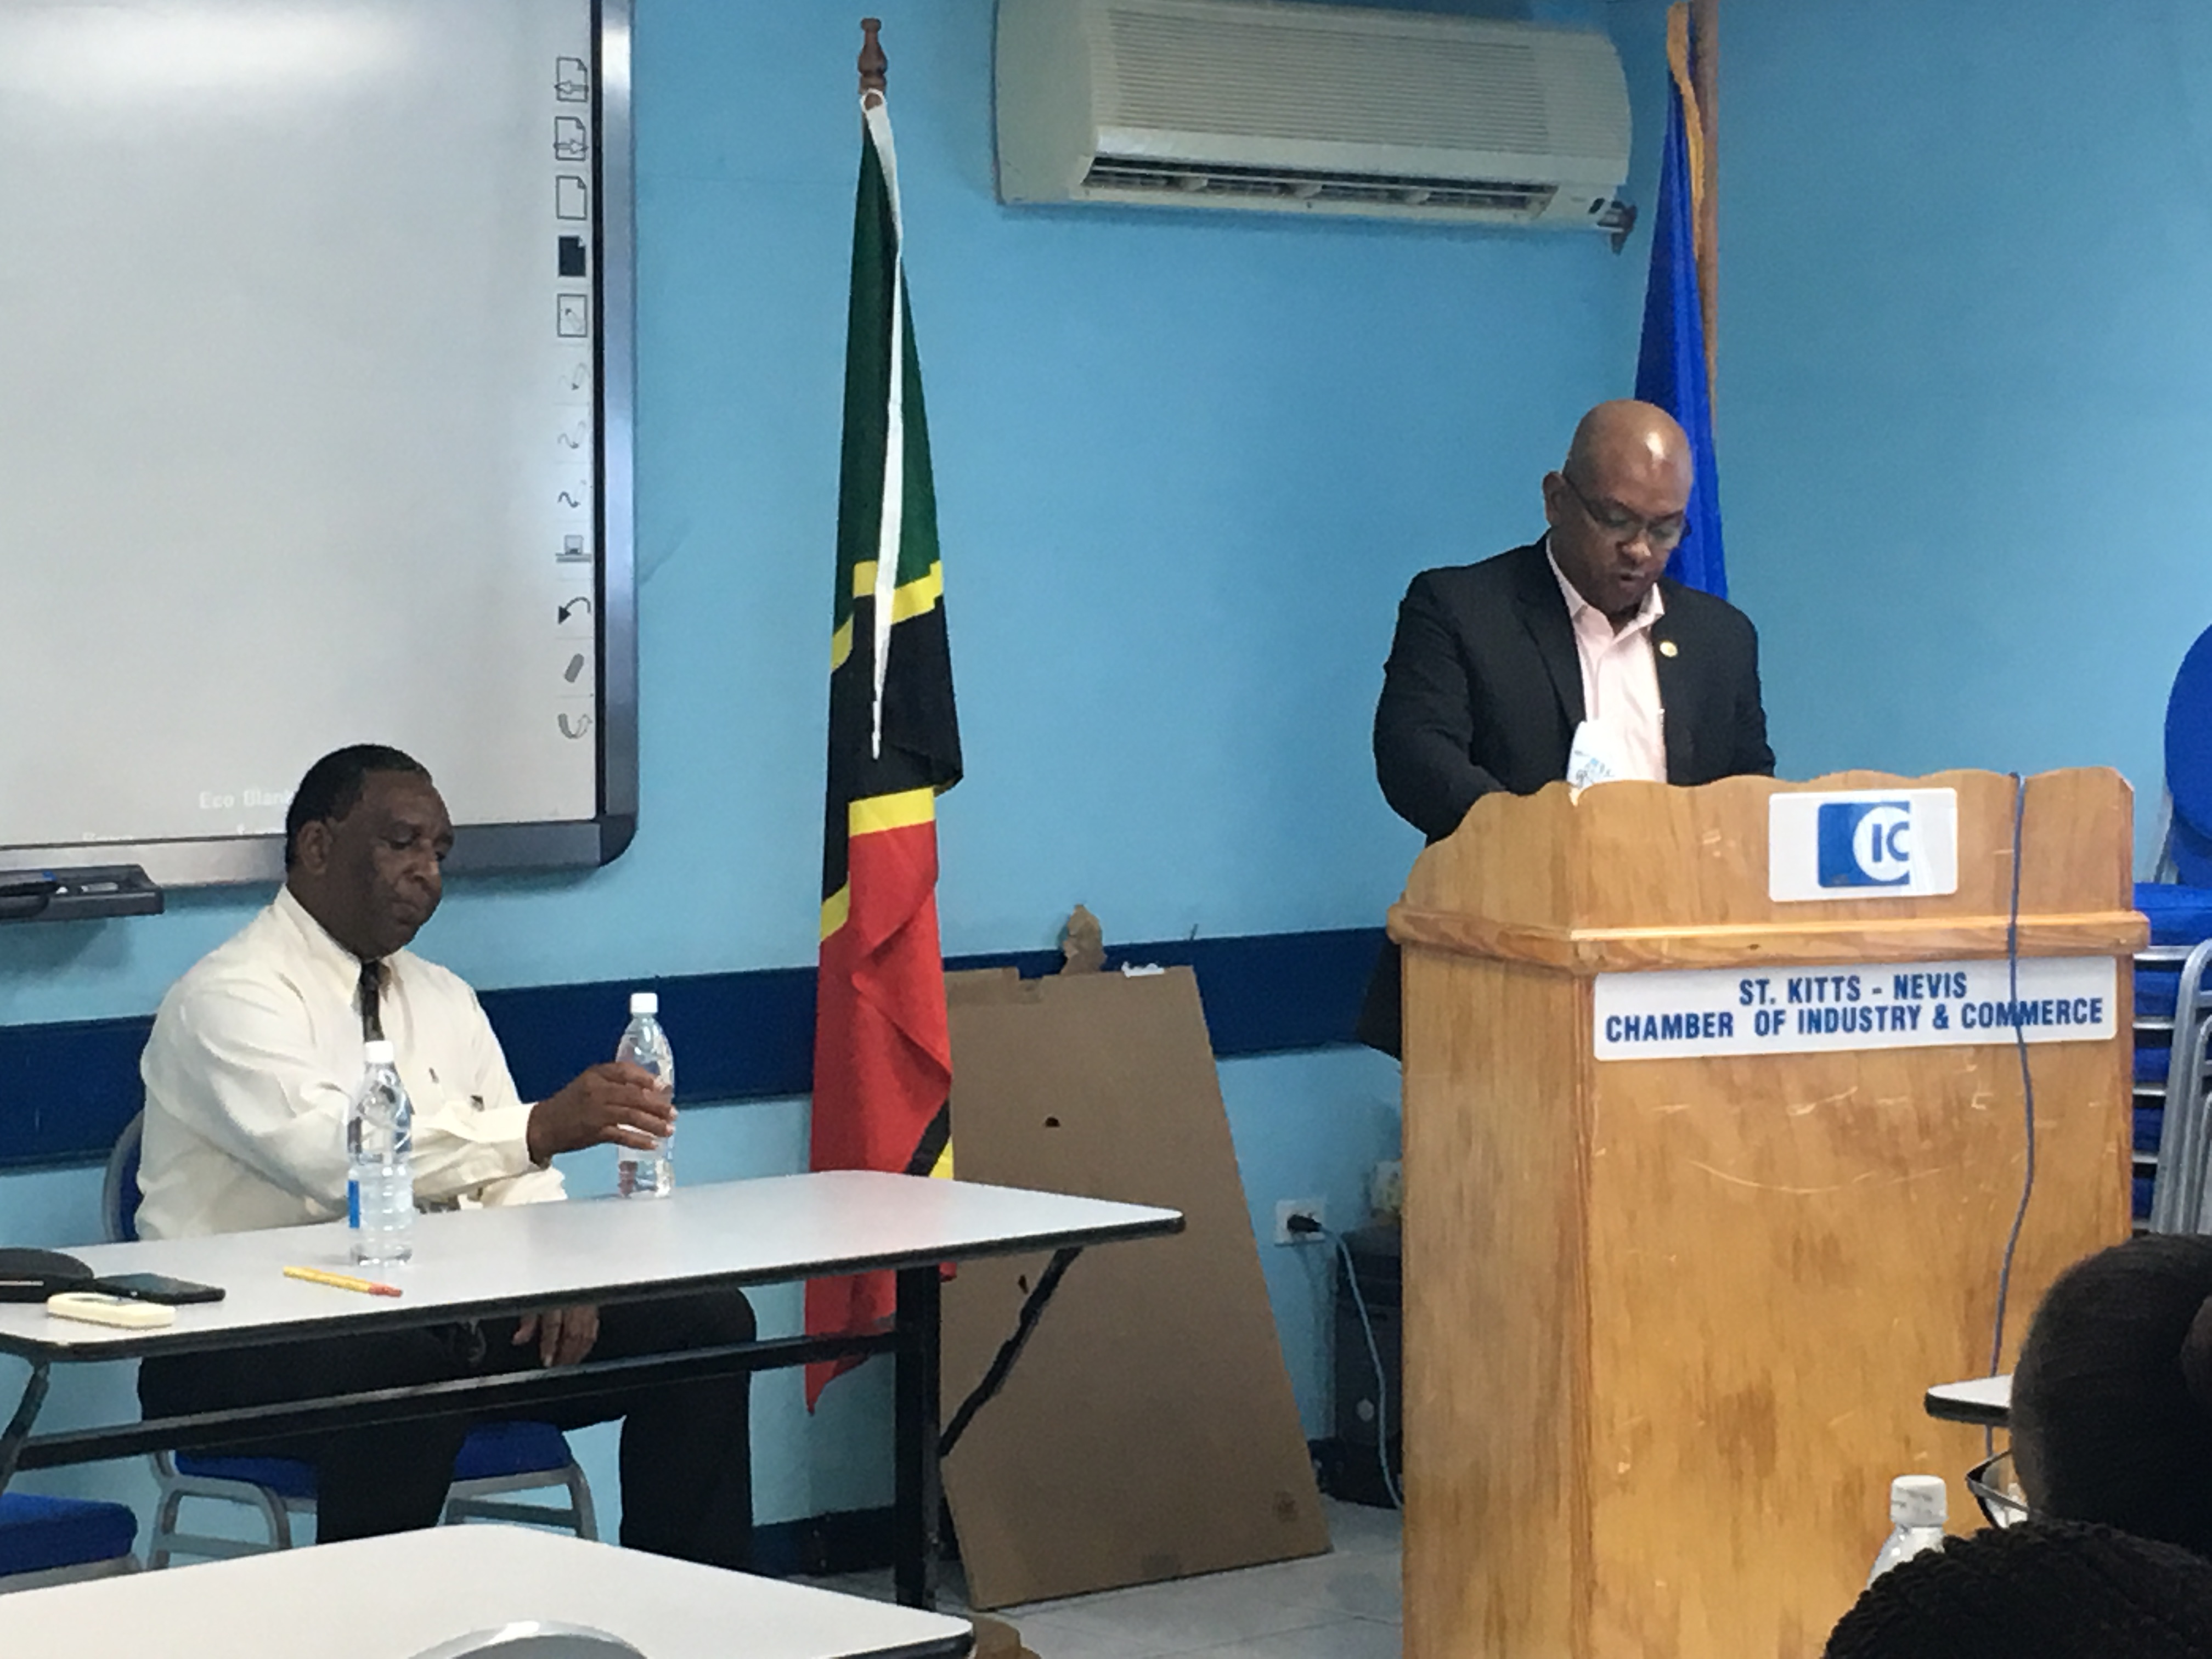 The Organizaion of American States in St Kitts and Nevis in Partnership with the Ministry of Tourism, International Trade, Industry and Commerce, in the Month of March, 2017, hosted a Three-day Certificate Training for Future Small Business Center (SBDC), with the Aim of Establishing SBDC in St Kitts and Nevis that would Facilitate Entrepreneurs in the Small-Medium Size Sector.(April 28, 2017)